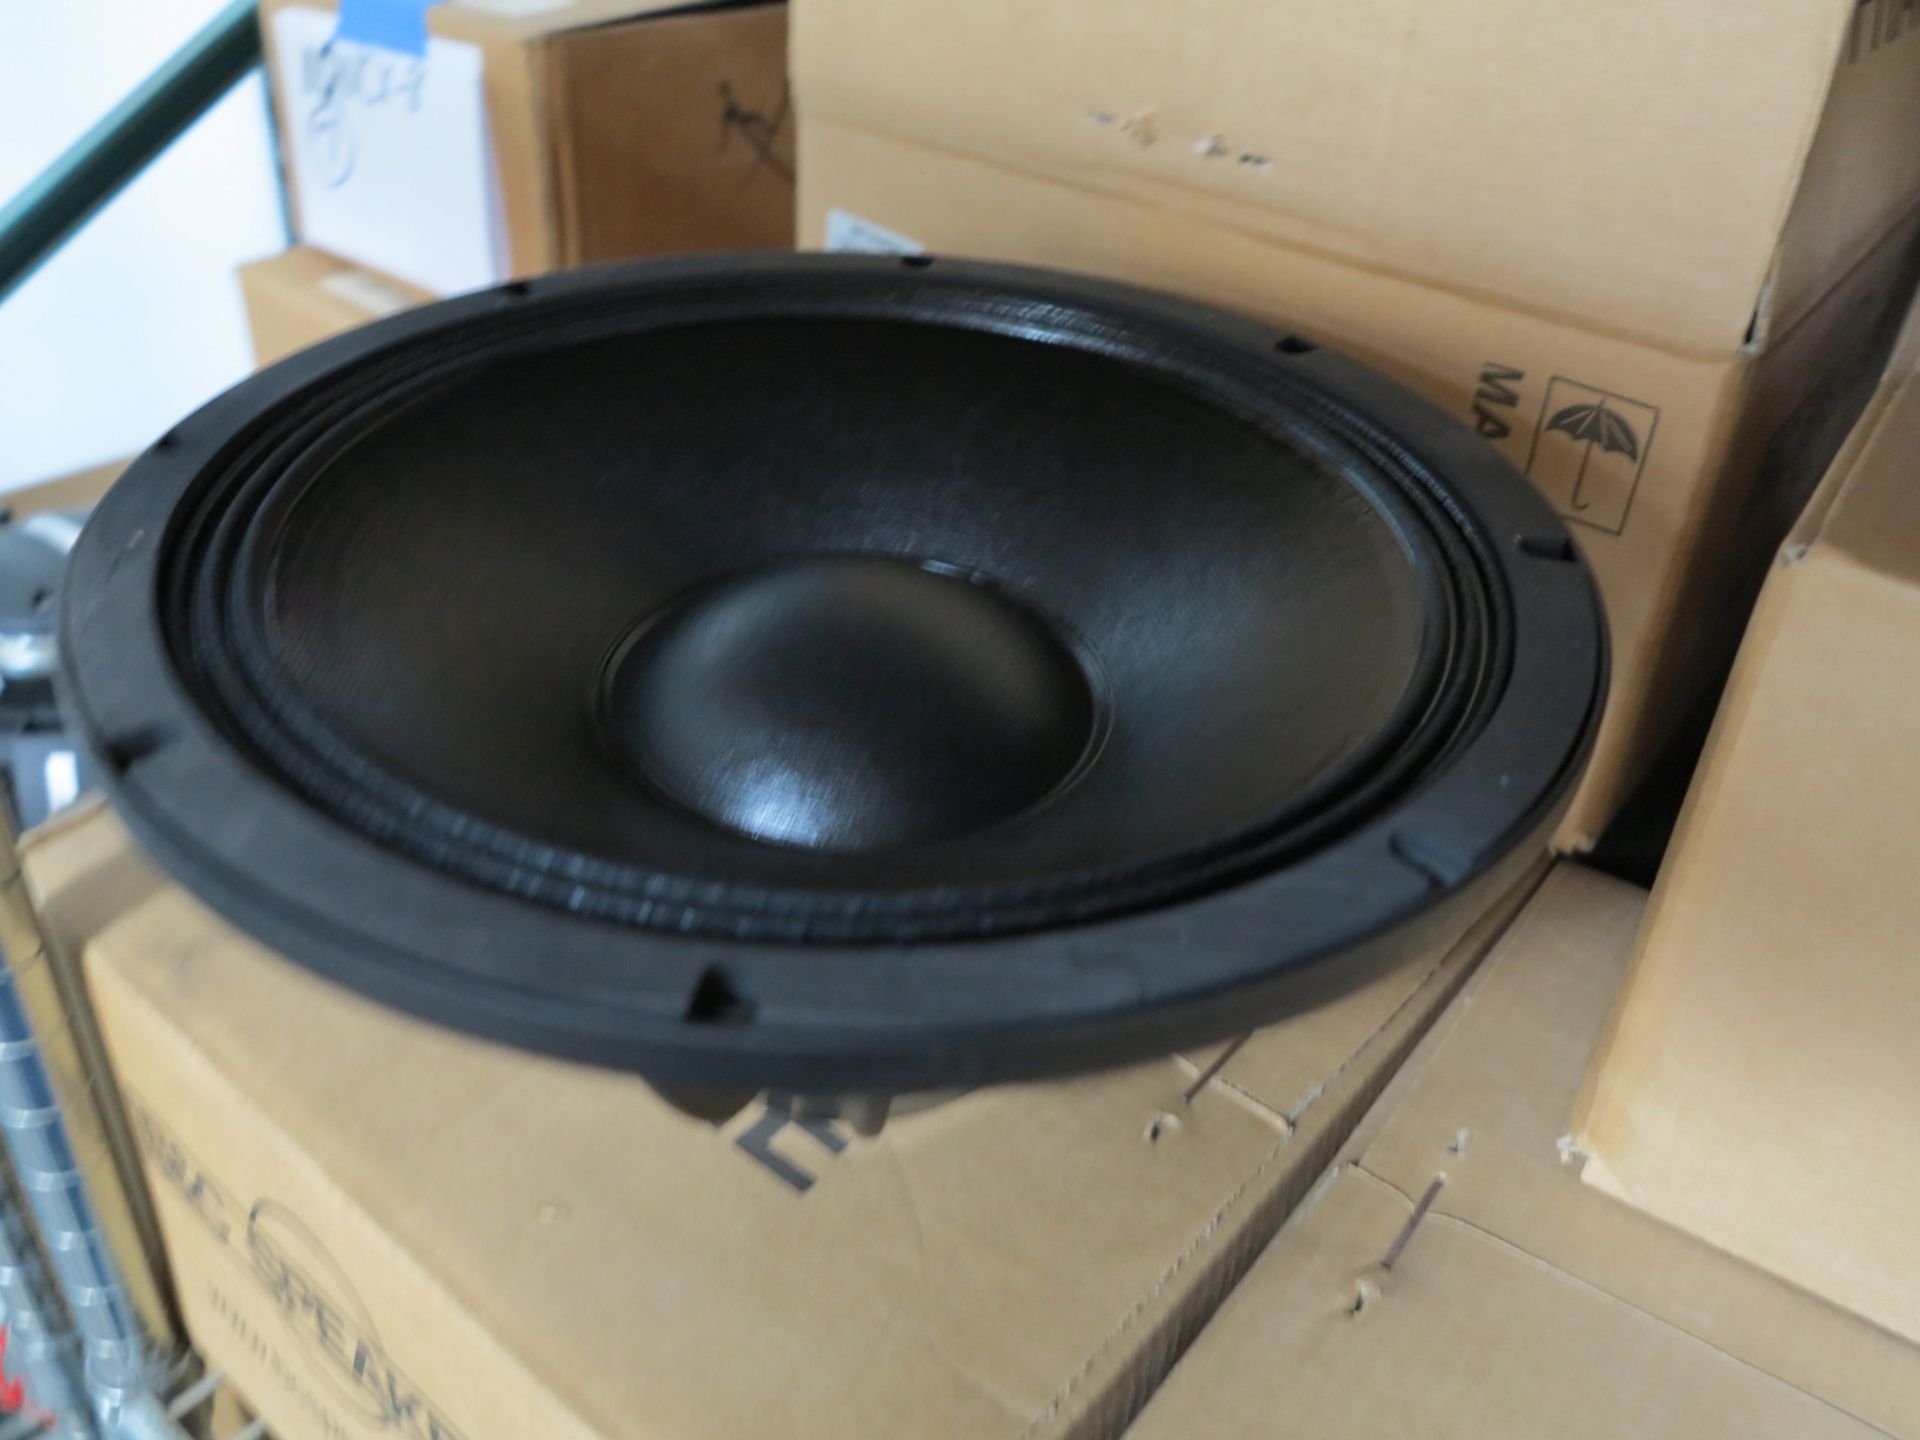 LOT - (16) B&C 12" WOOFERS, 8 OHM, MODEL 12NW76-8 - Image 4 of 4